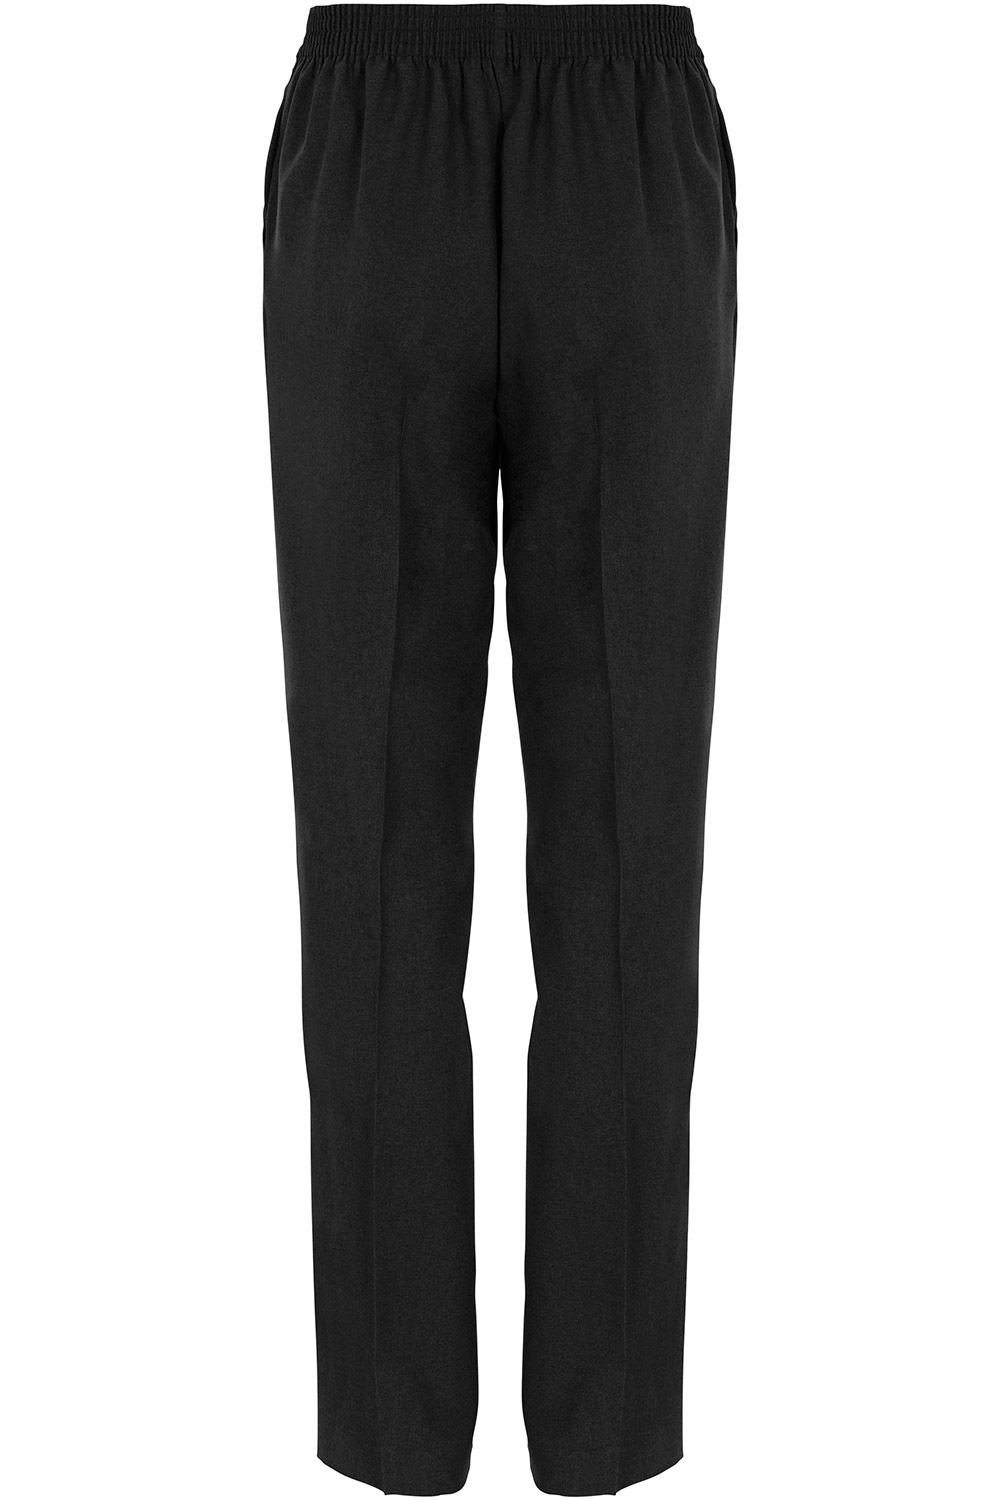 Buy Pull On Classic Straight Leg Trousers | Bonmarché